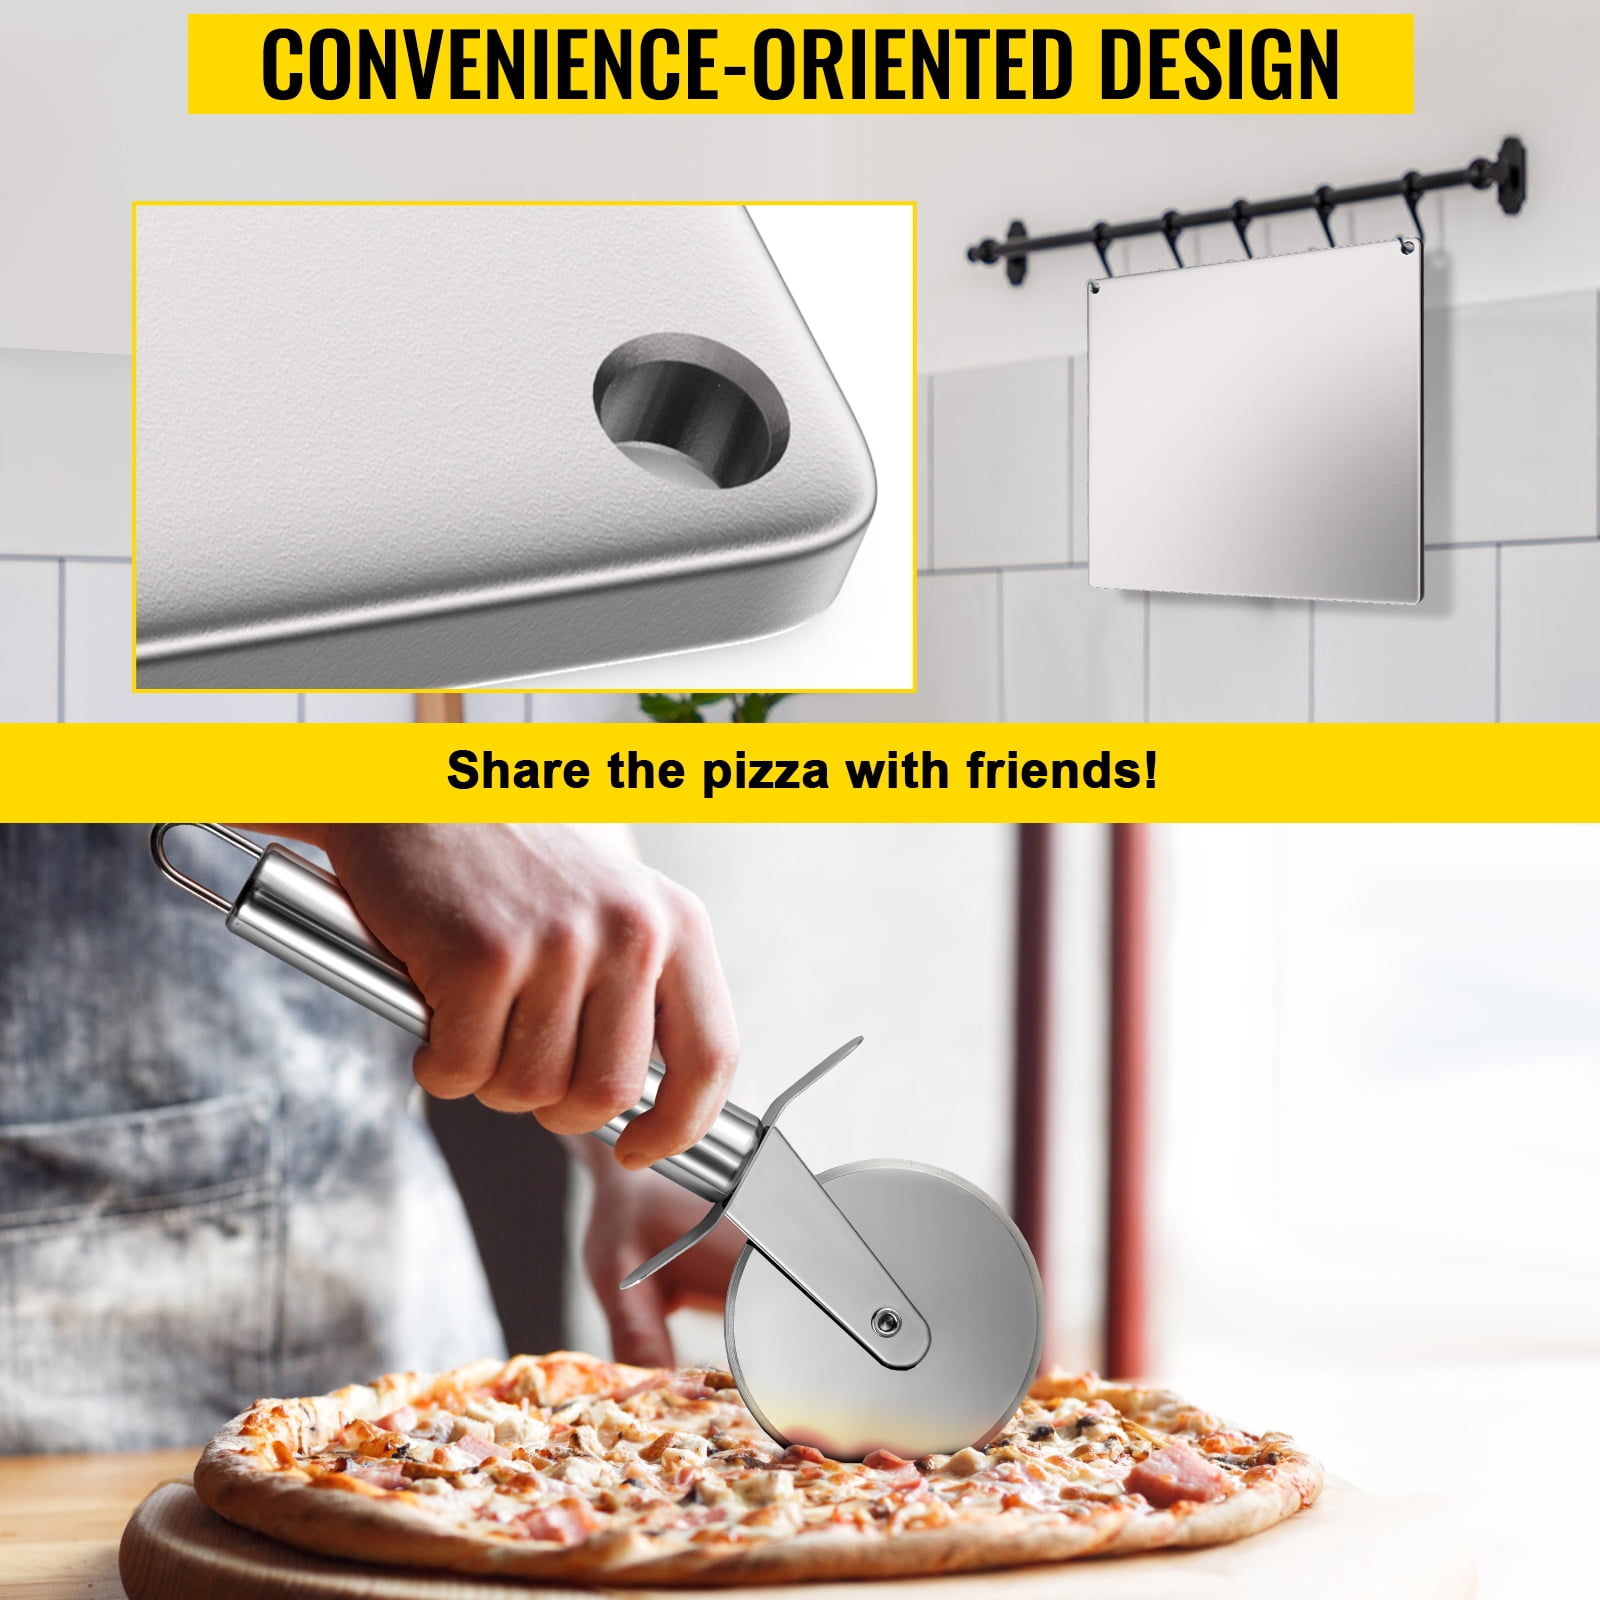 Square Pizza Steel by Conductive Cooking (3/16 Standard, 14x20 XL)